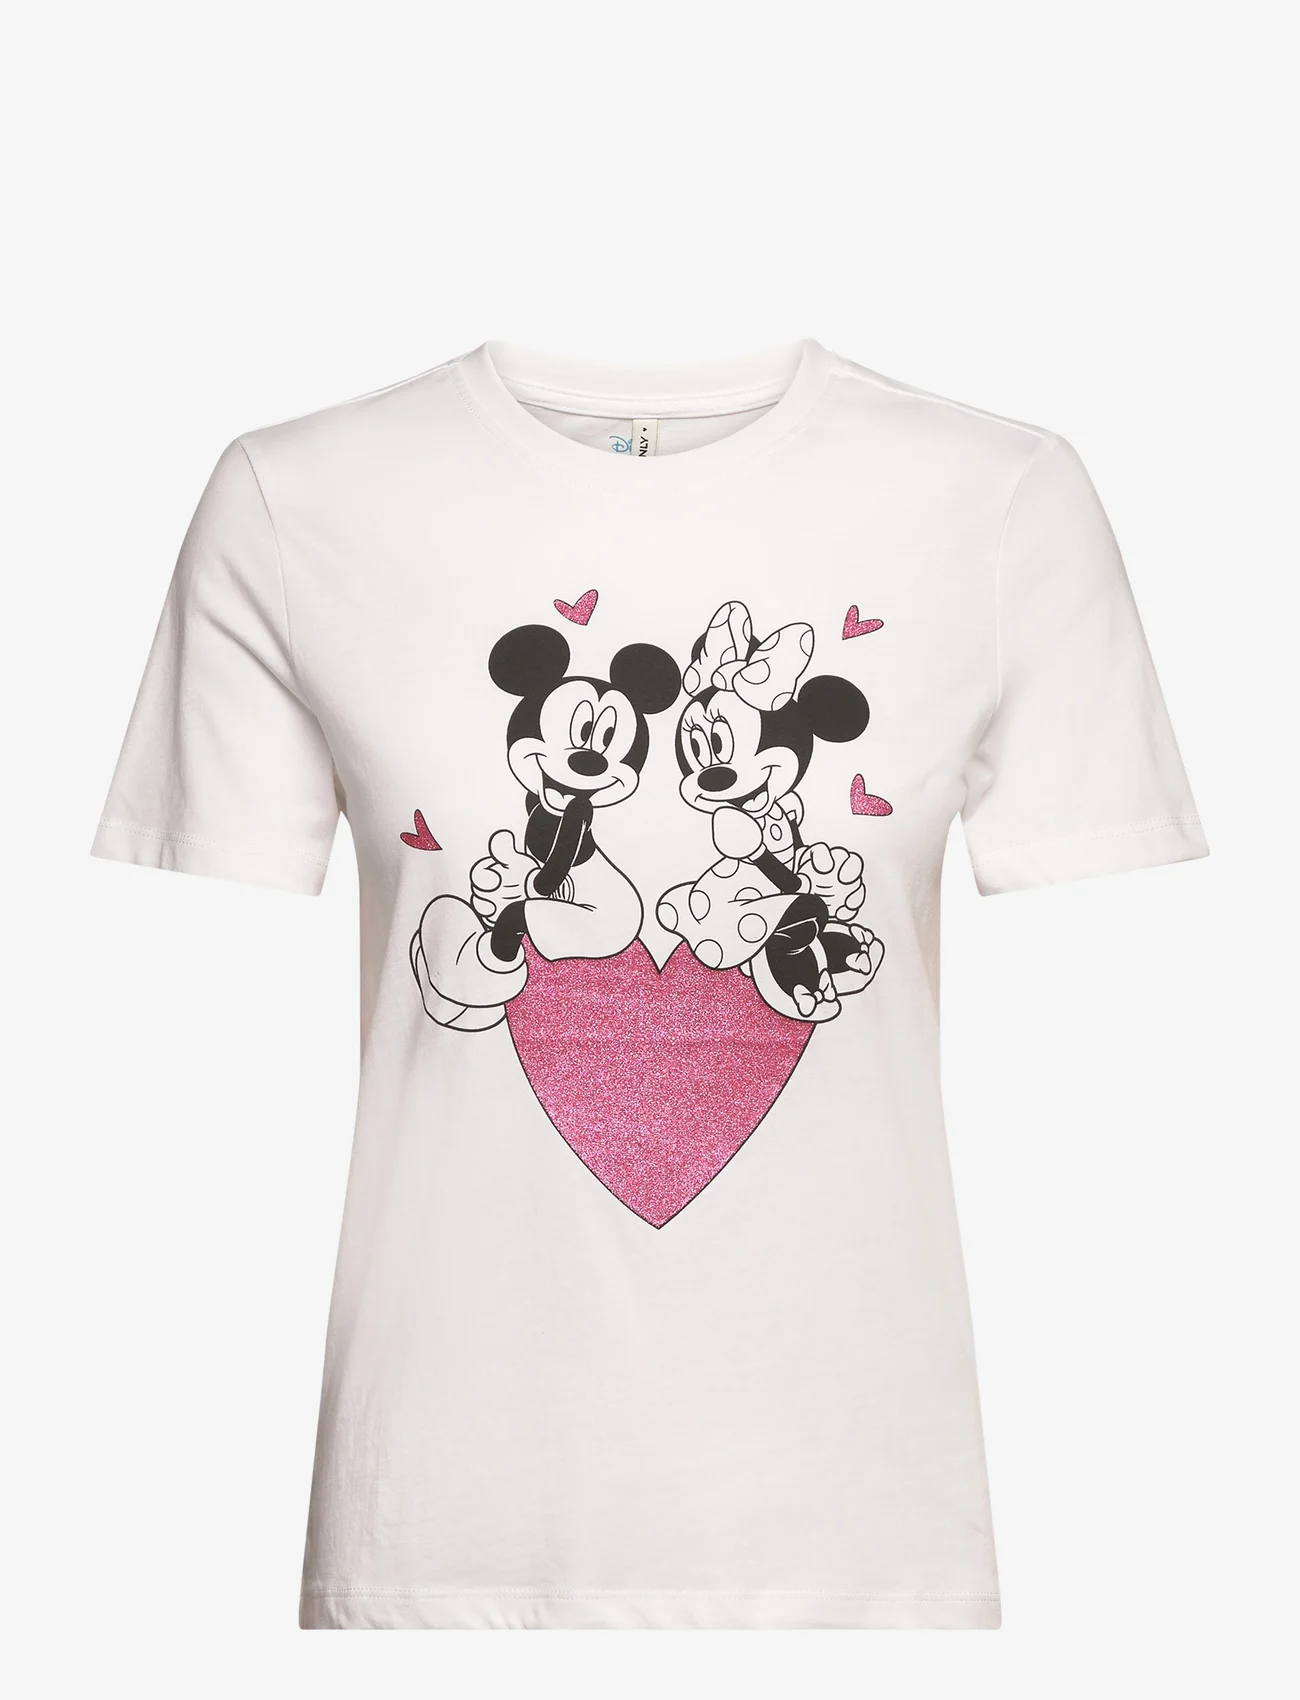 ONLY - ONLMICKEY LIFE REG S/S VALENTINE TOP JRS - madalaimad hinnad - bright white - 0